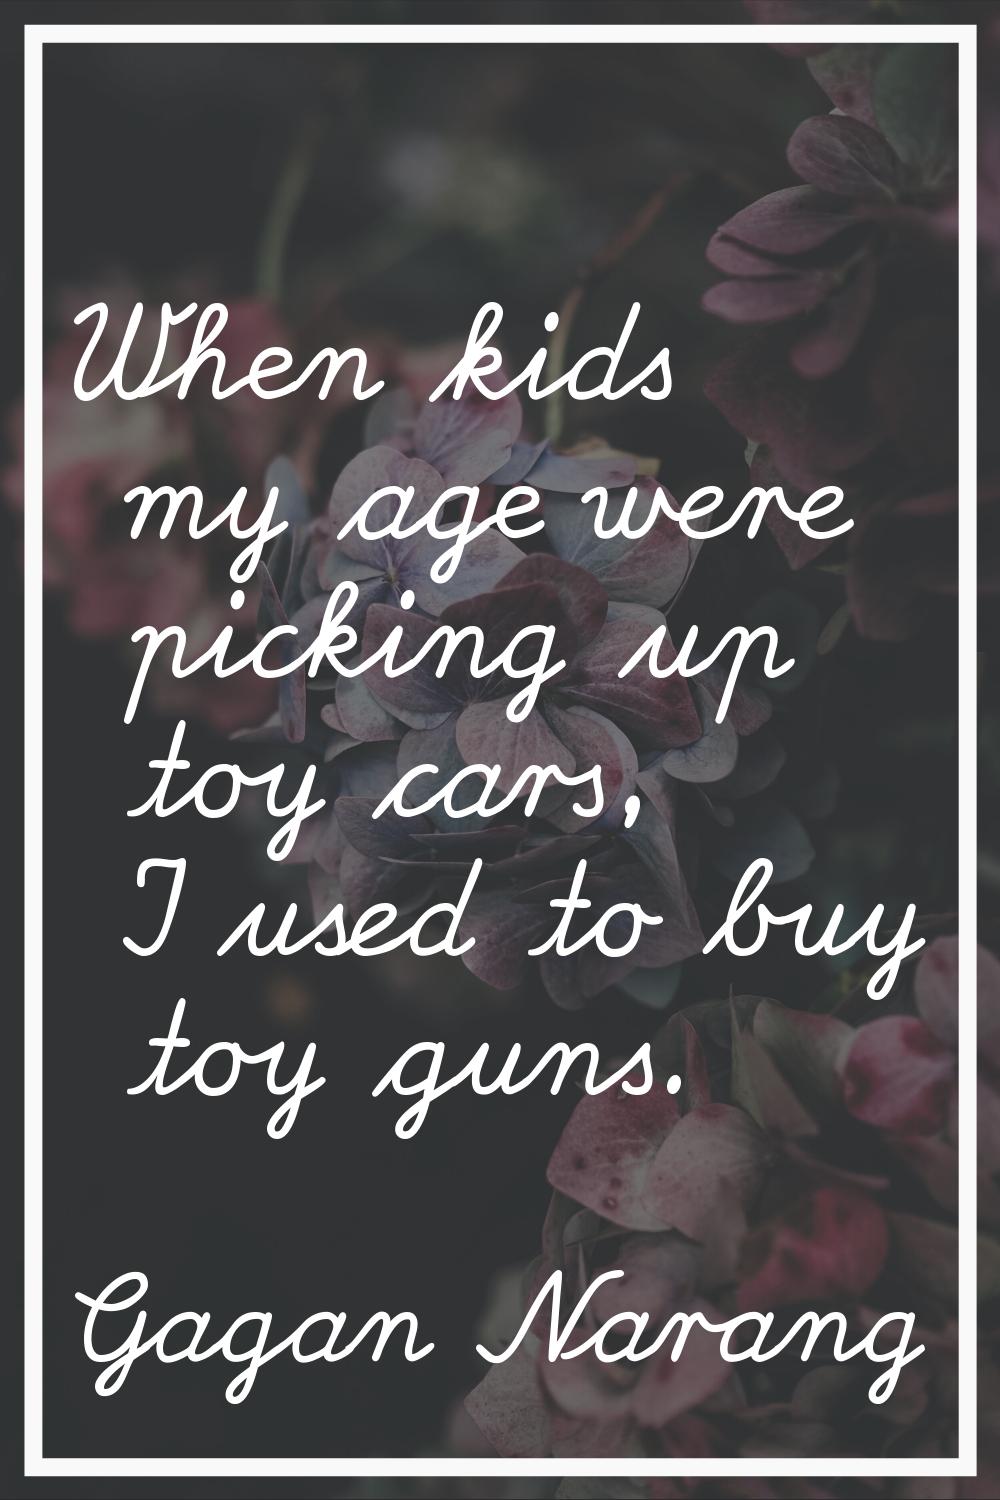 When kids my age were picking up toy cars, I used to buy toy guns.